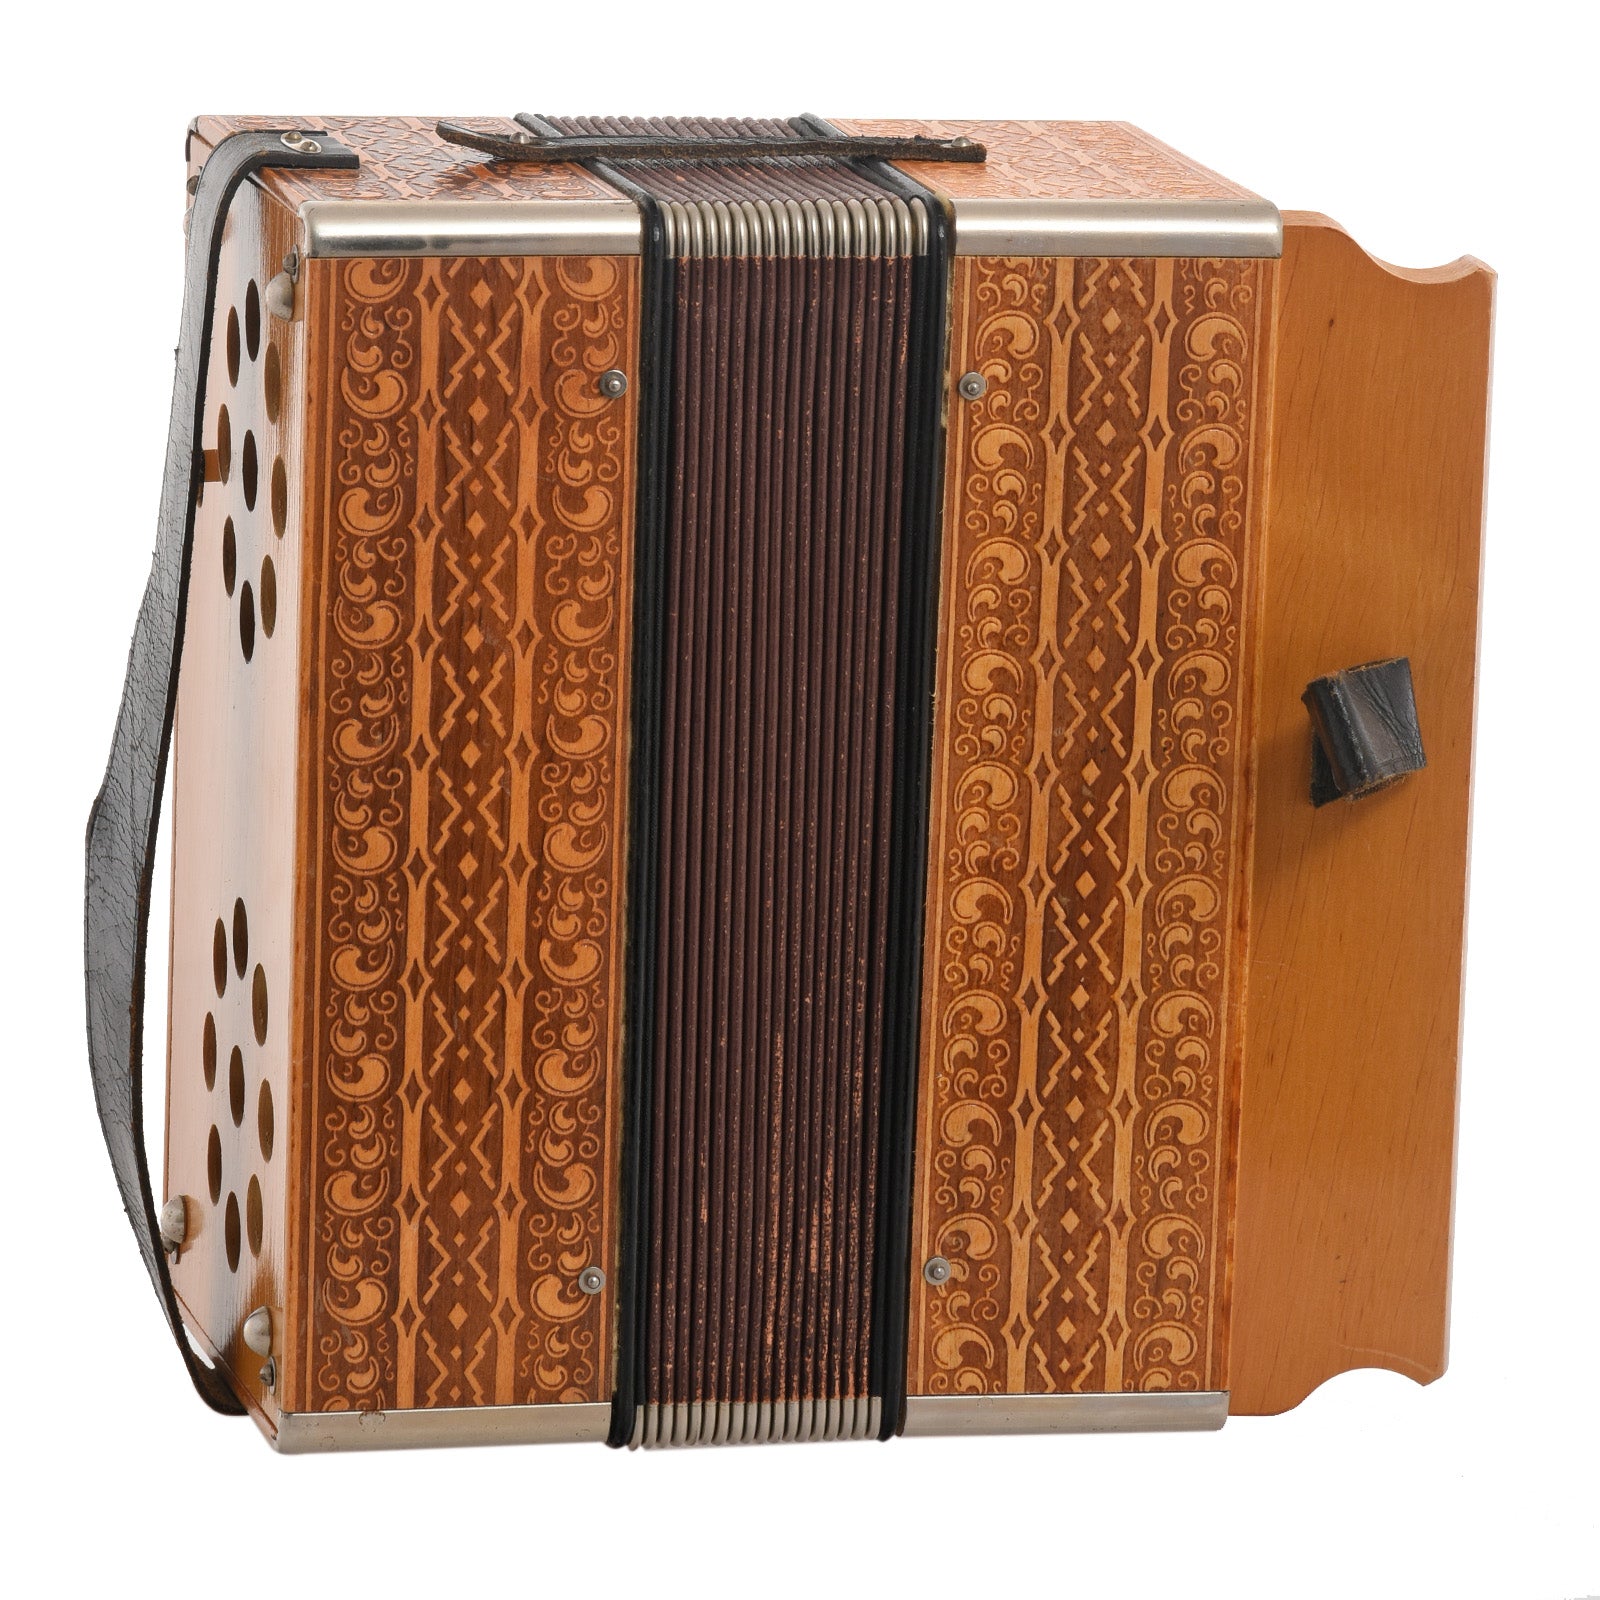 Back and side of Hohner Button Accordion (1920s)